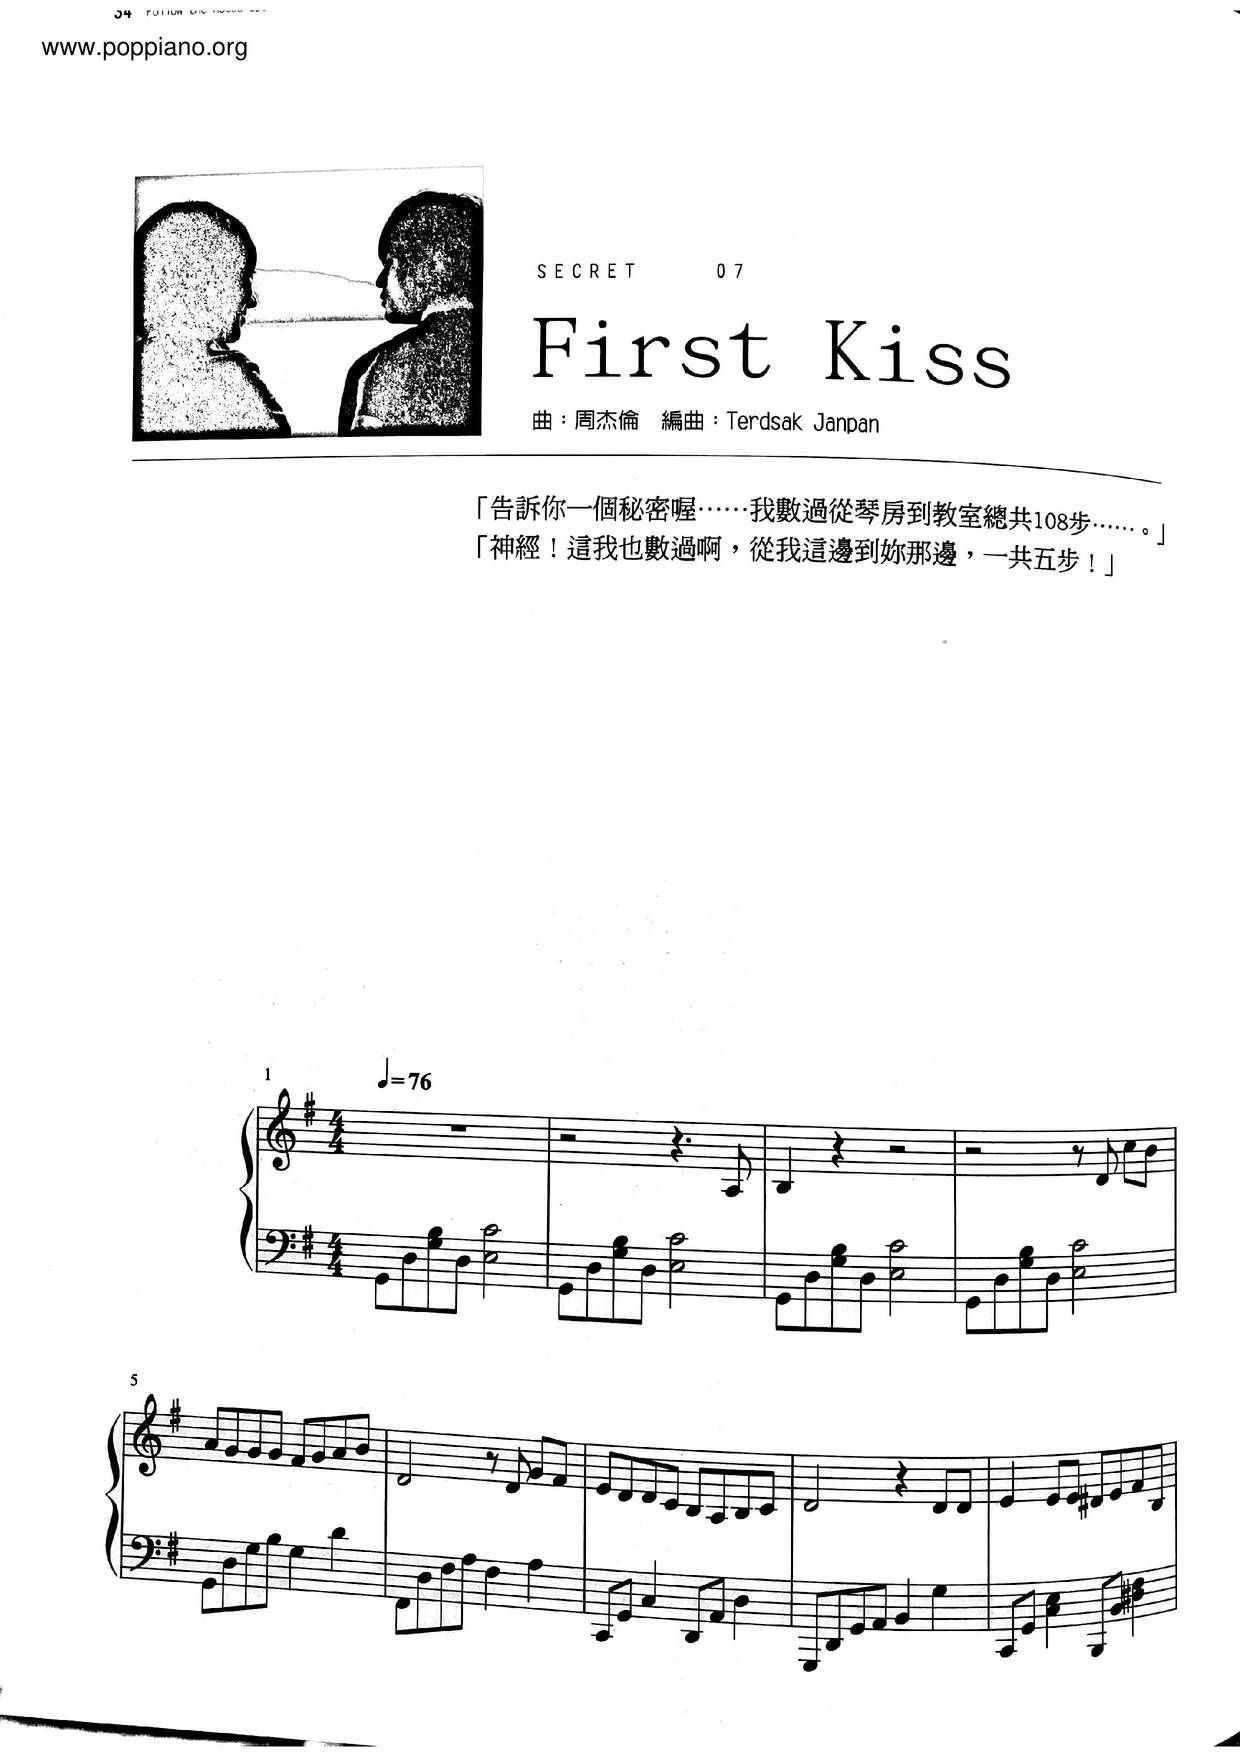 Secrets That Cannot Be Told-First Kiss Score